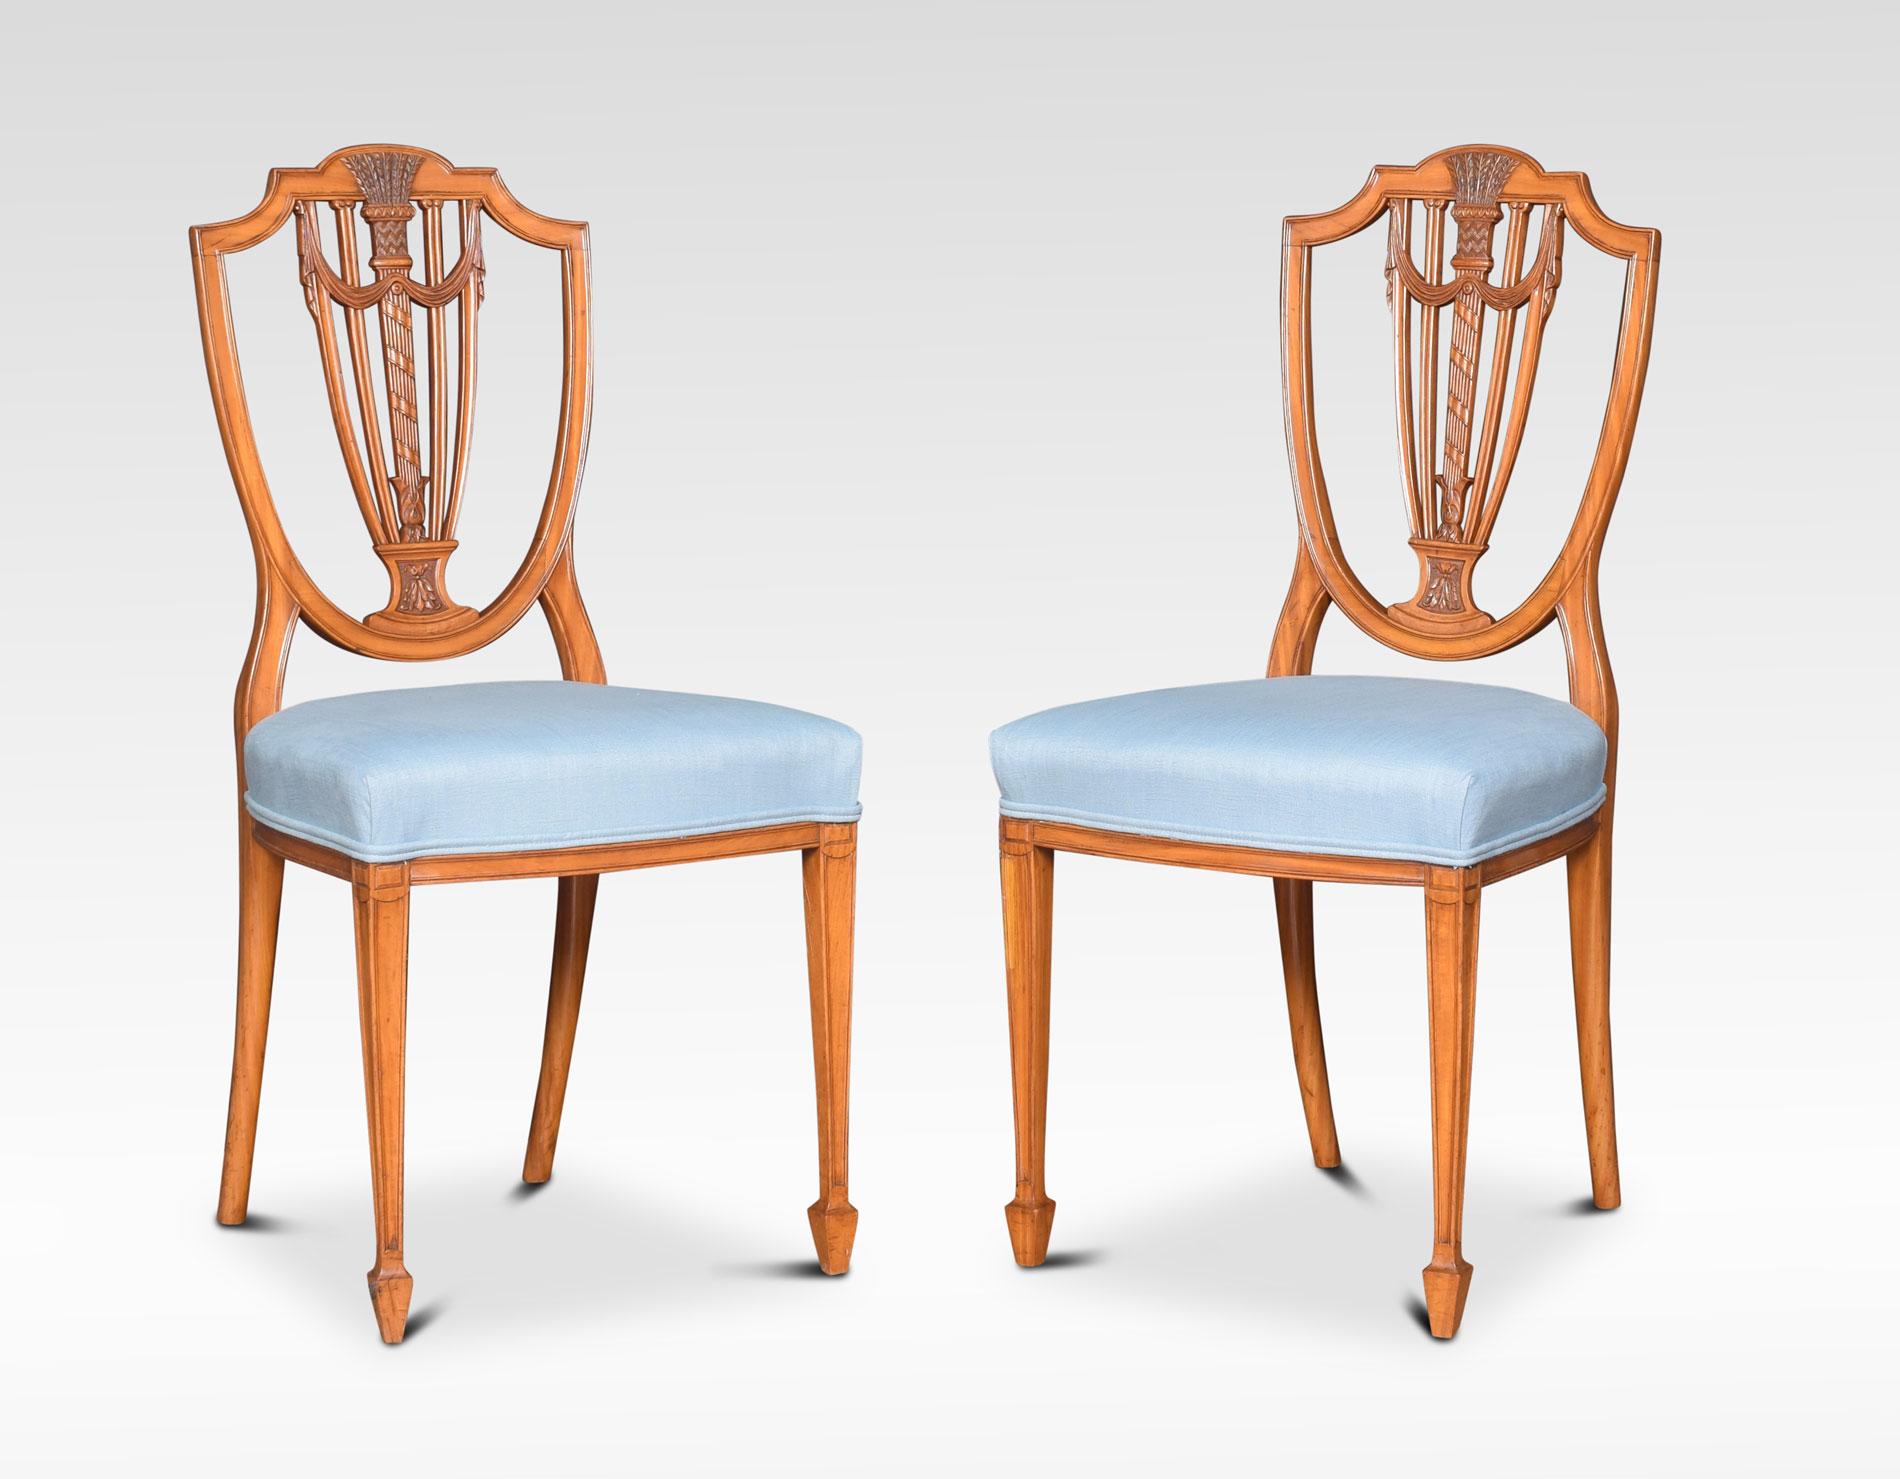 Set of four Georgian revival satinwood side chairs, the open shield back with a pierced splat. To the overstuffed seat raised on square tapering legs terminating in spade feet.
Dimensions:
Height 37 inches height to seat 19 inches
Width 17.5